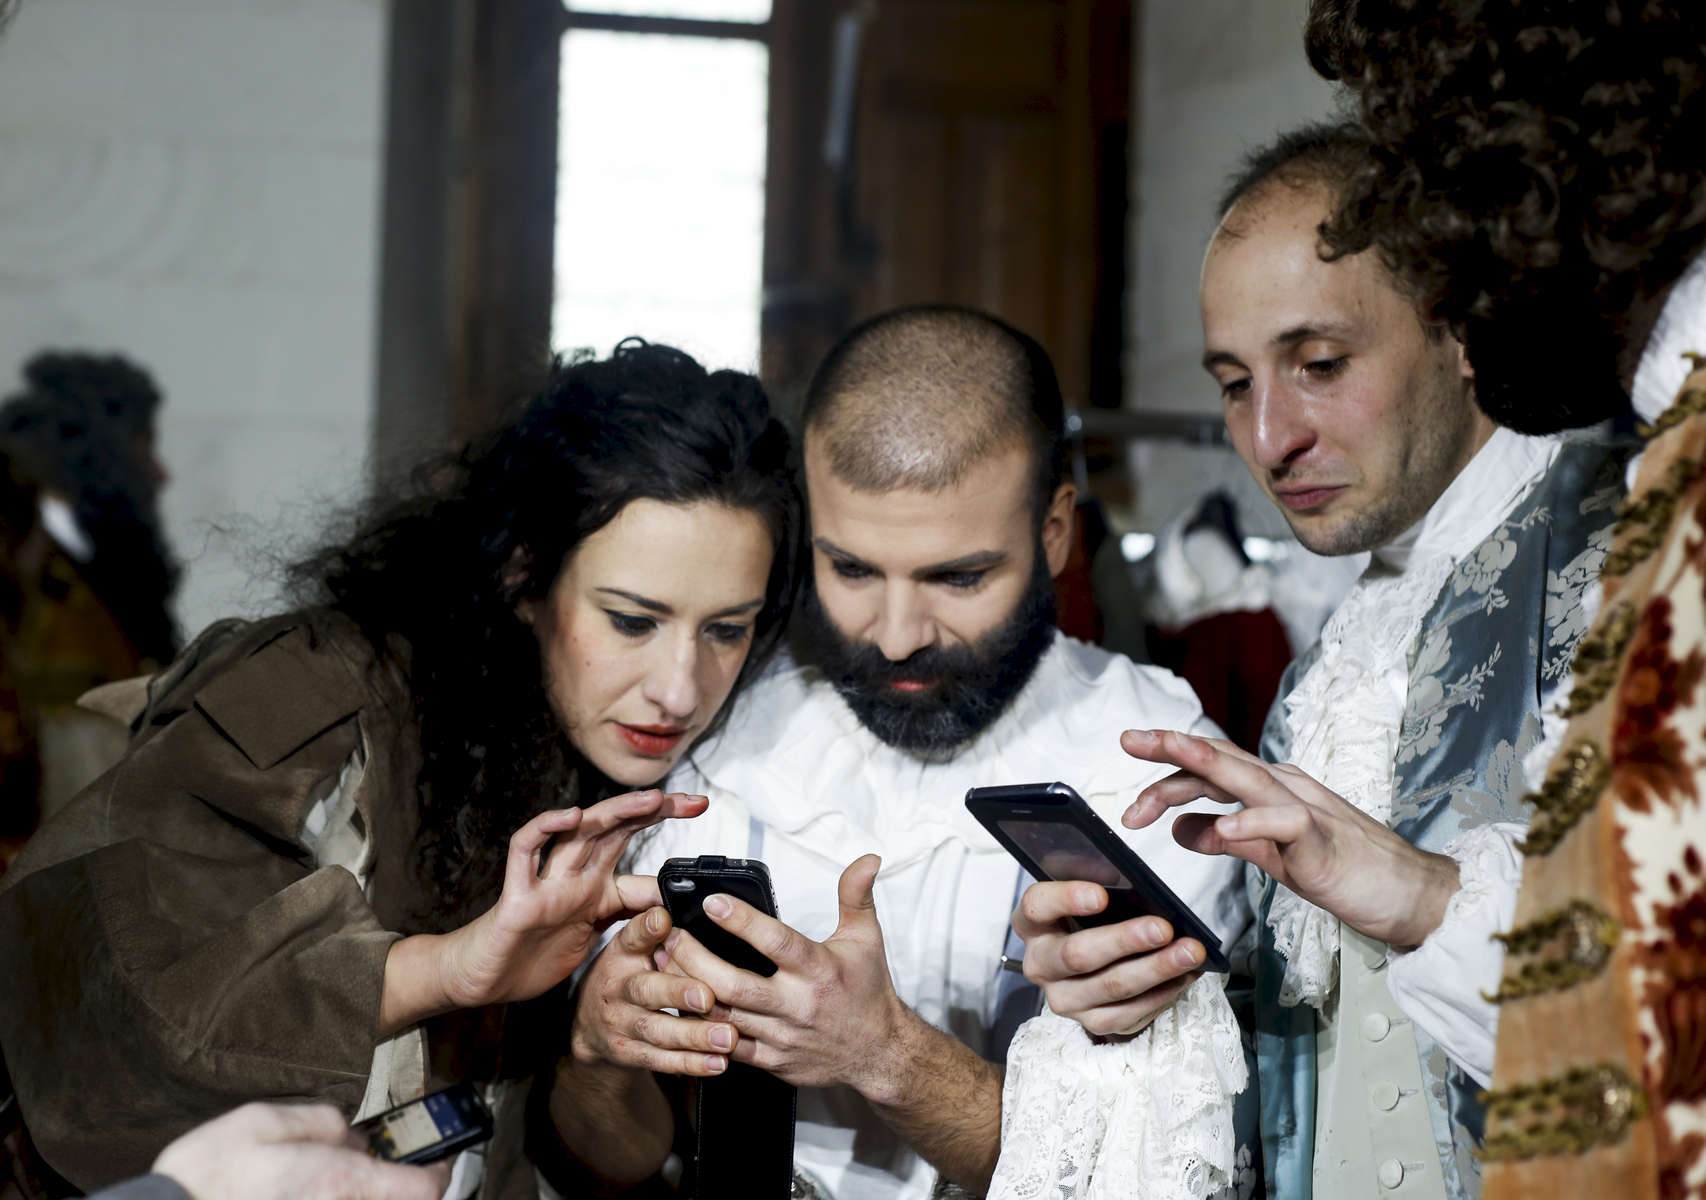 Melodie Veillard, Florent Robin, Romain Falik and Camille Ranciere check their cellphone as the last performance is being transmitted lived on Facebook.